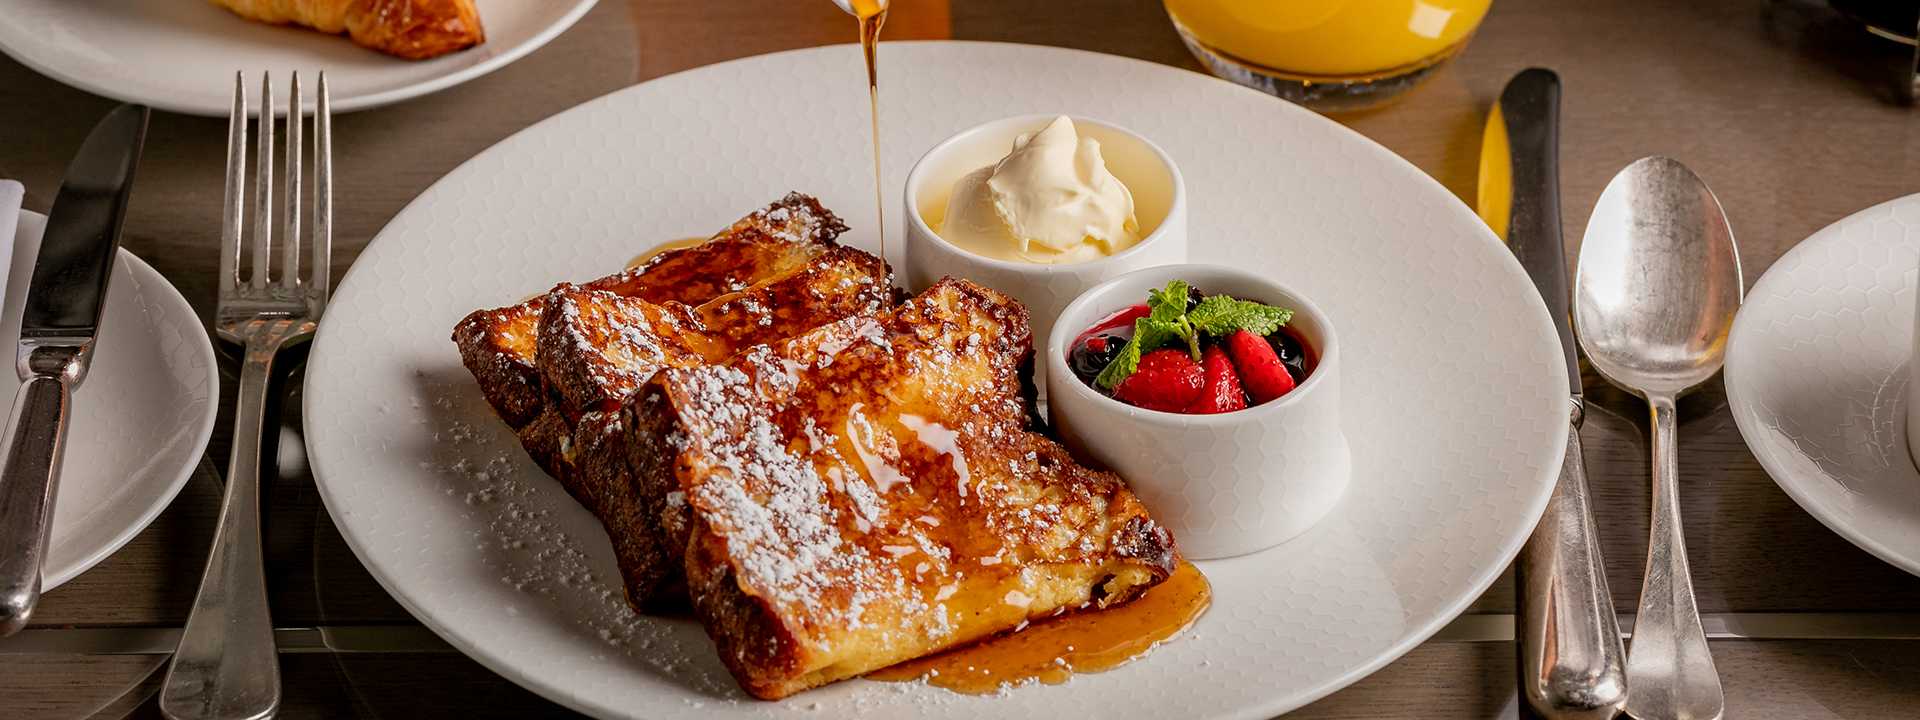 French brioche toast with cream and berry compote, a sweet breakfast that can be ordered in the Collins Room.